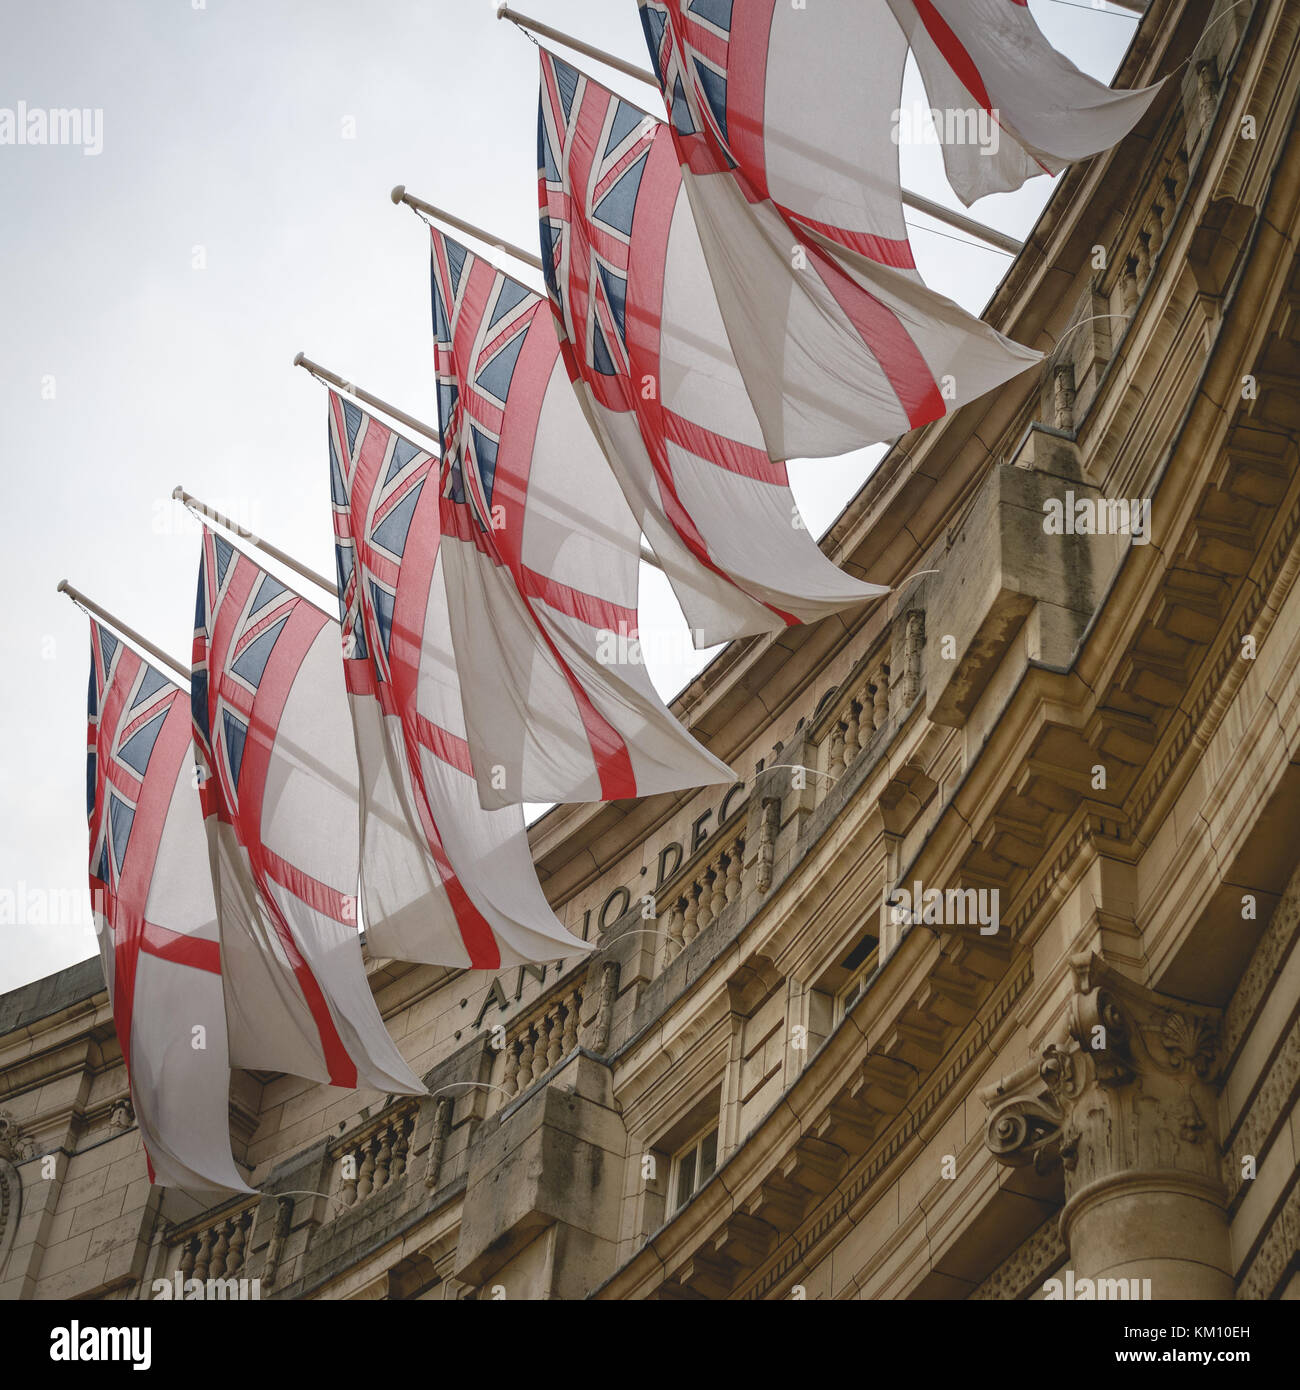 St. George's flags on the Admiralty Arch in London (UK). July 2017. Square format. Stock Photo